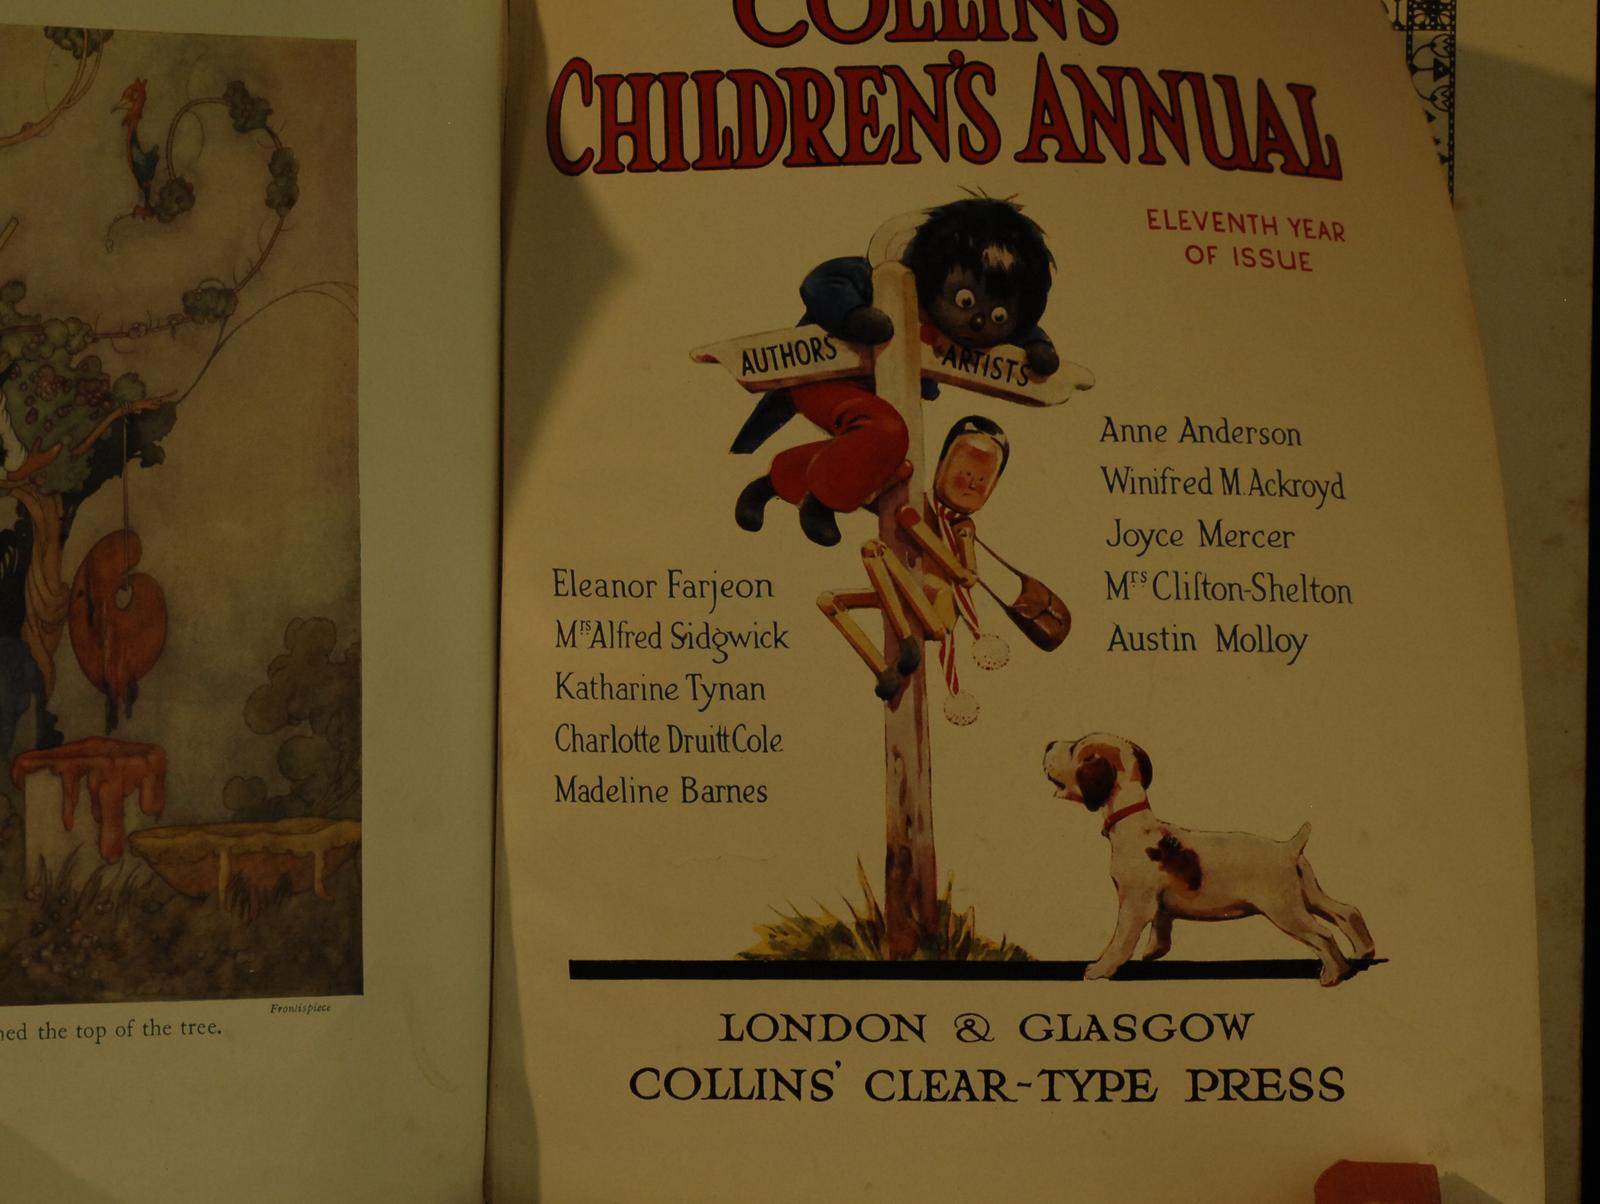 mbb006503e_-_Unnamed_-_Collins_Children_s_Annual_-_Contains_Illustrations.jpg